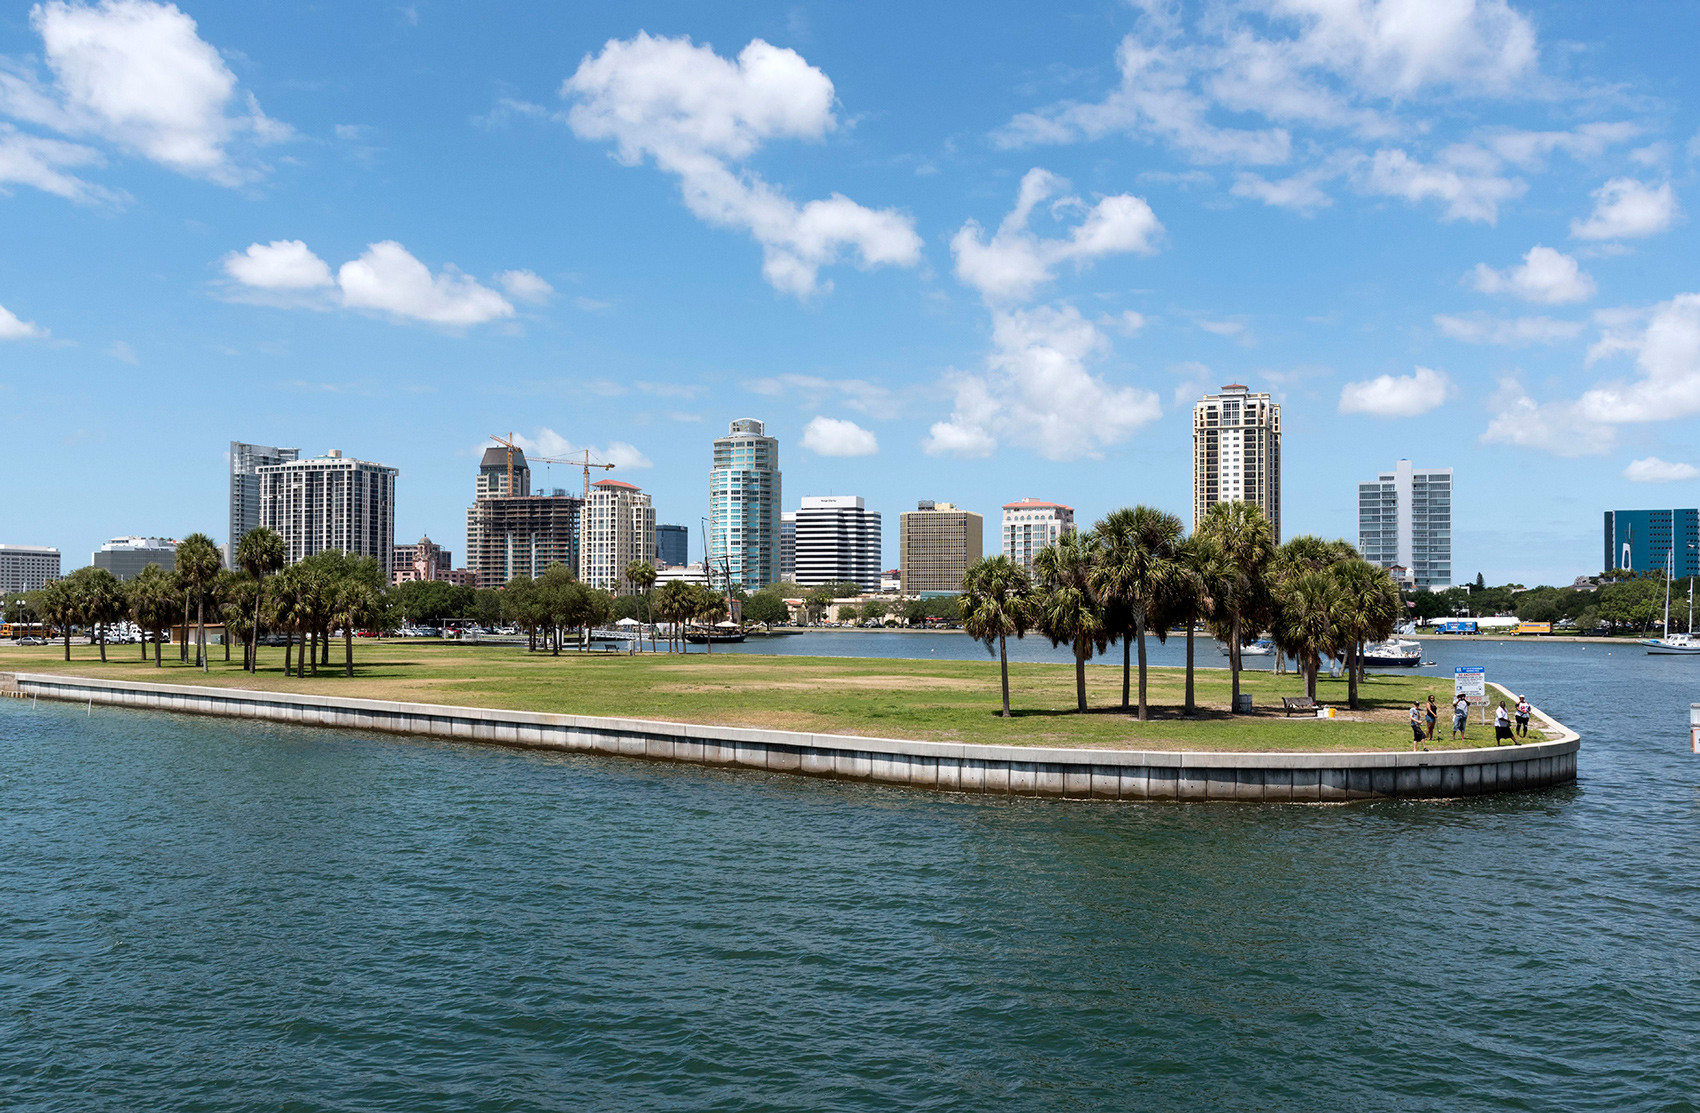 The Mooring Field and skyline view at the harbor entrance to St. Petersburg, Florida.